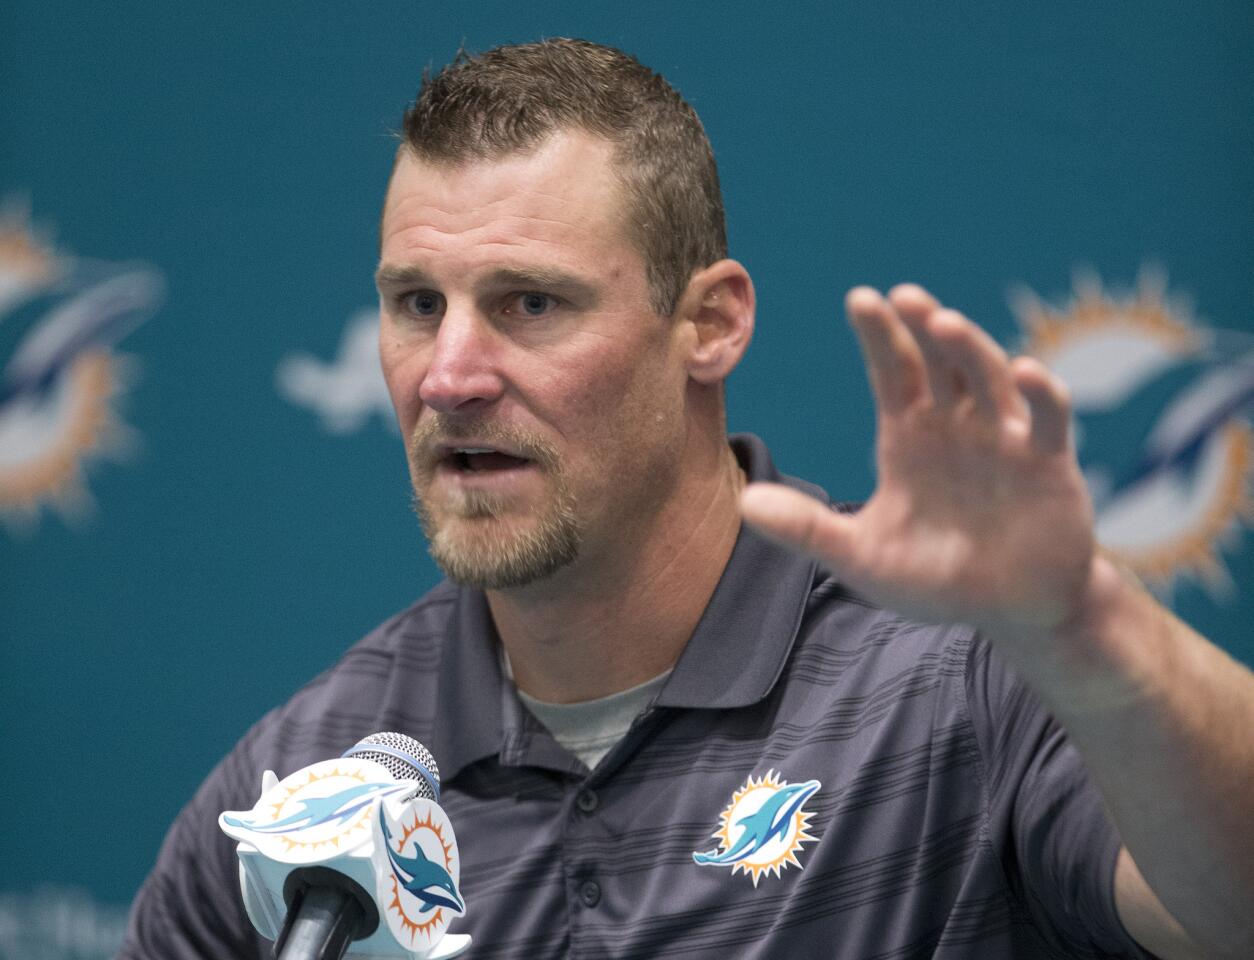 Campbell was named Dolphins coach after Joe Philbin was fired during the 2015 season. The team's inspired play under Campbell led to owner Steve Ross saying, "I love Dan Campbell."